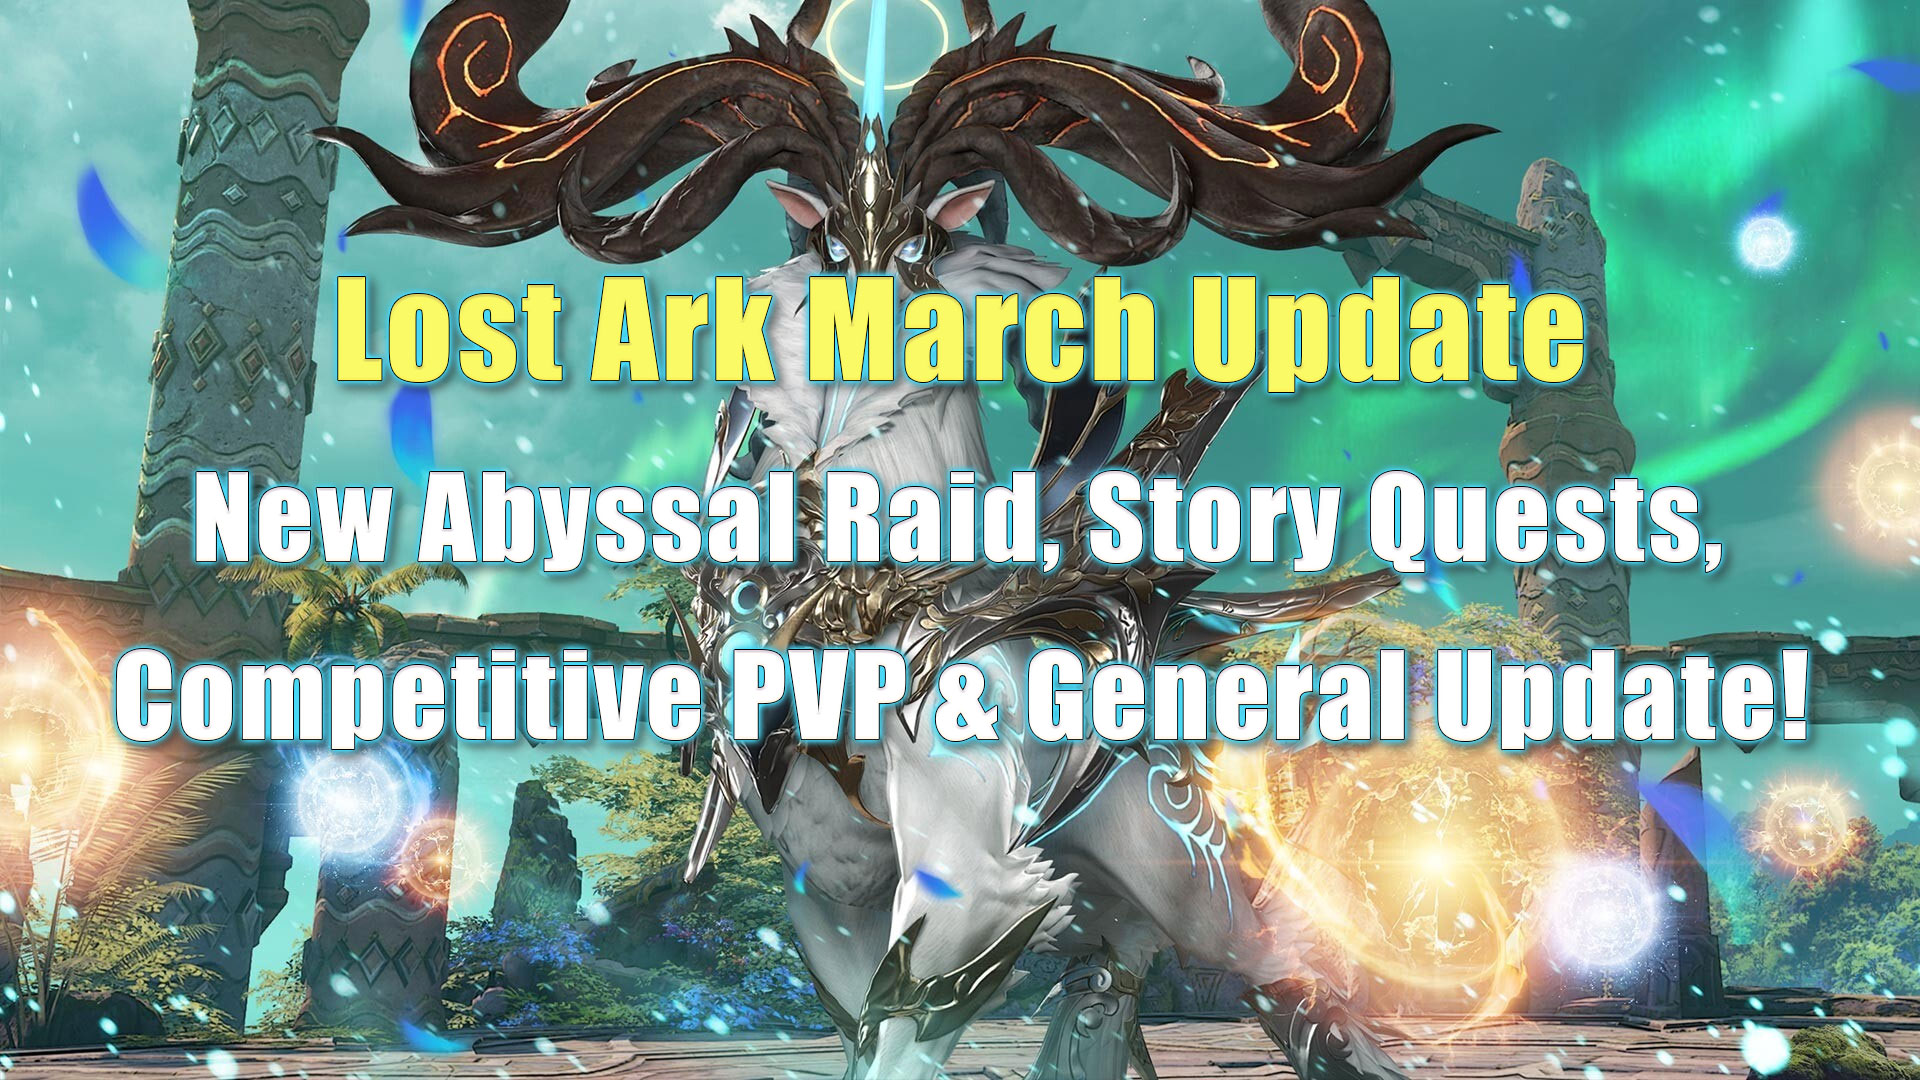 Lost Ark March Update New Abyssal Raid, Story Quests, Competitive PVP